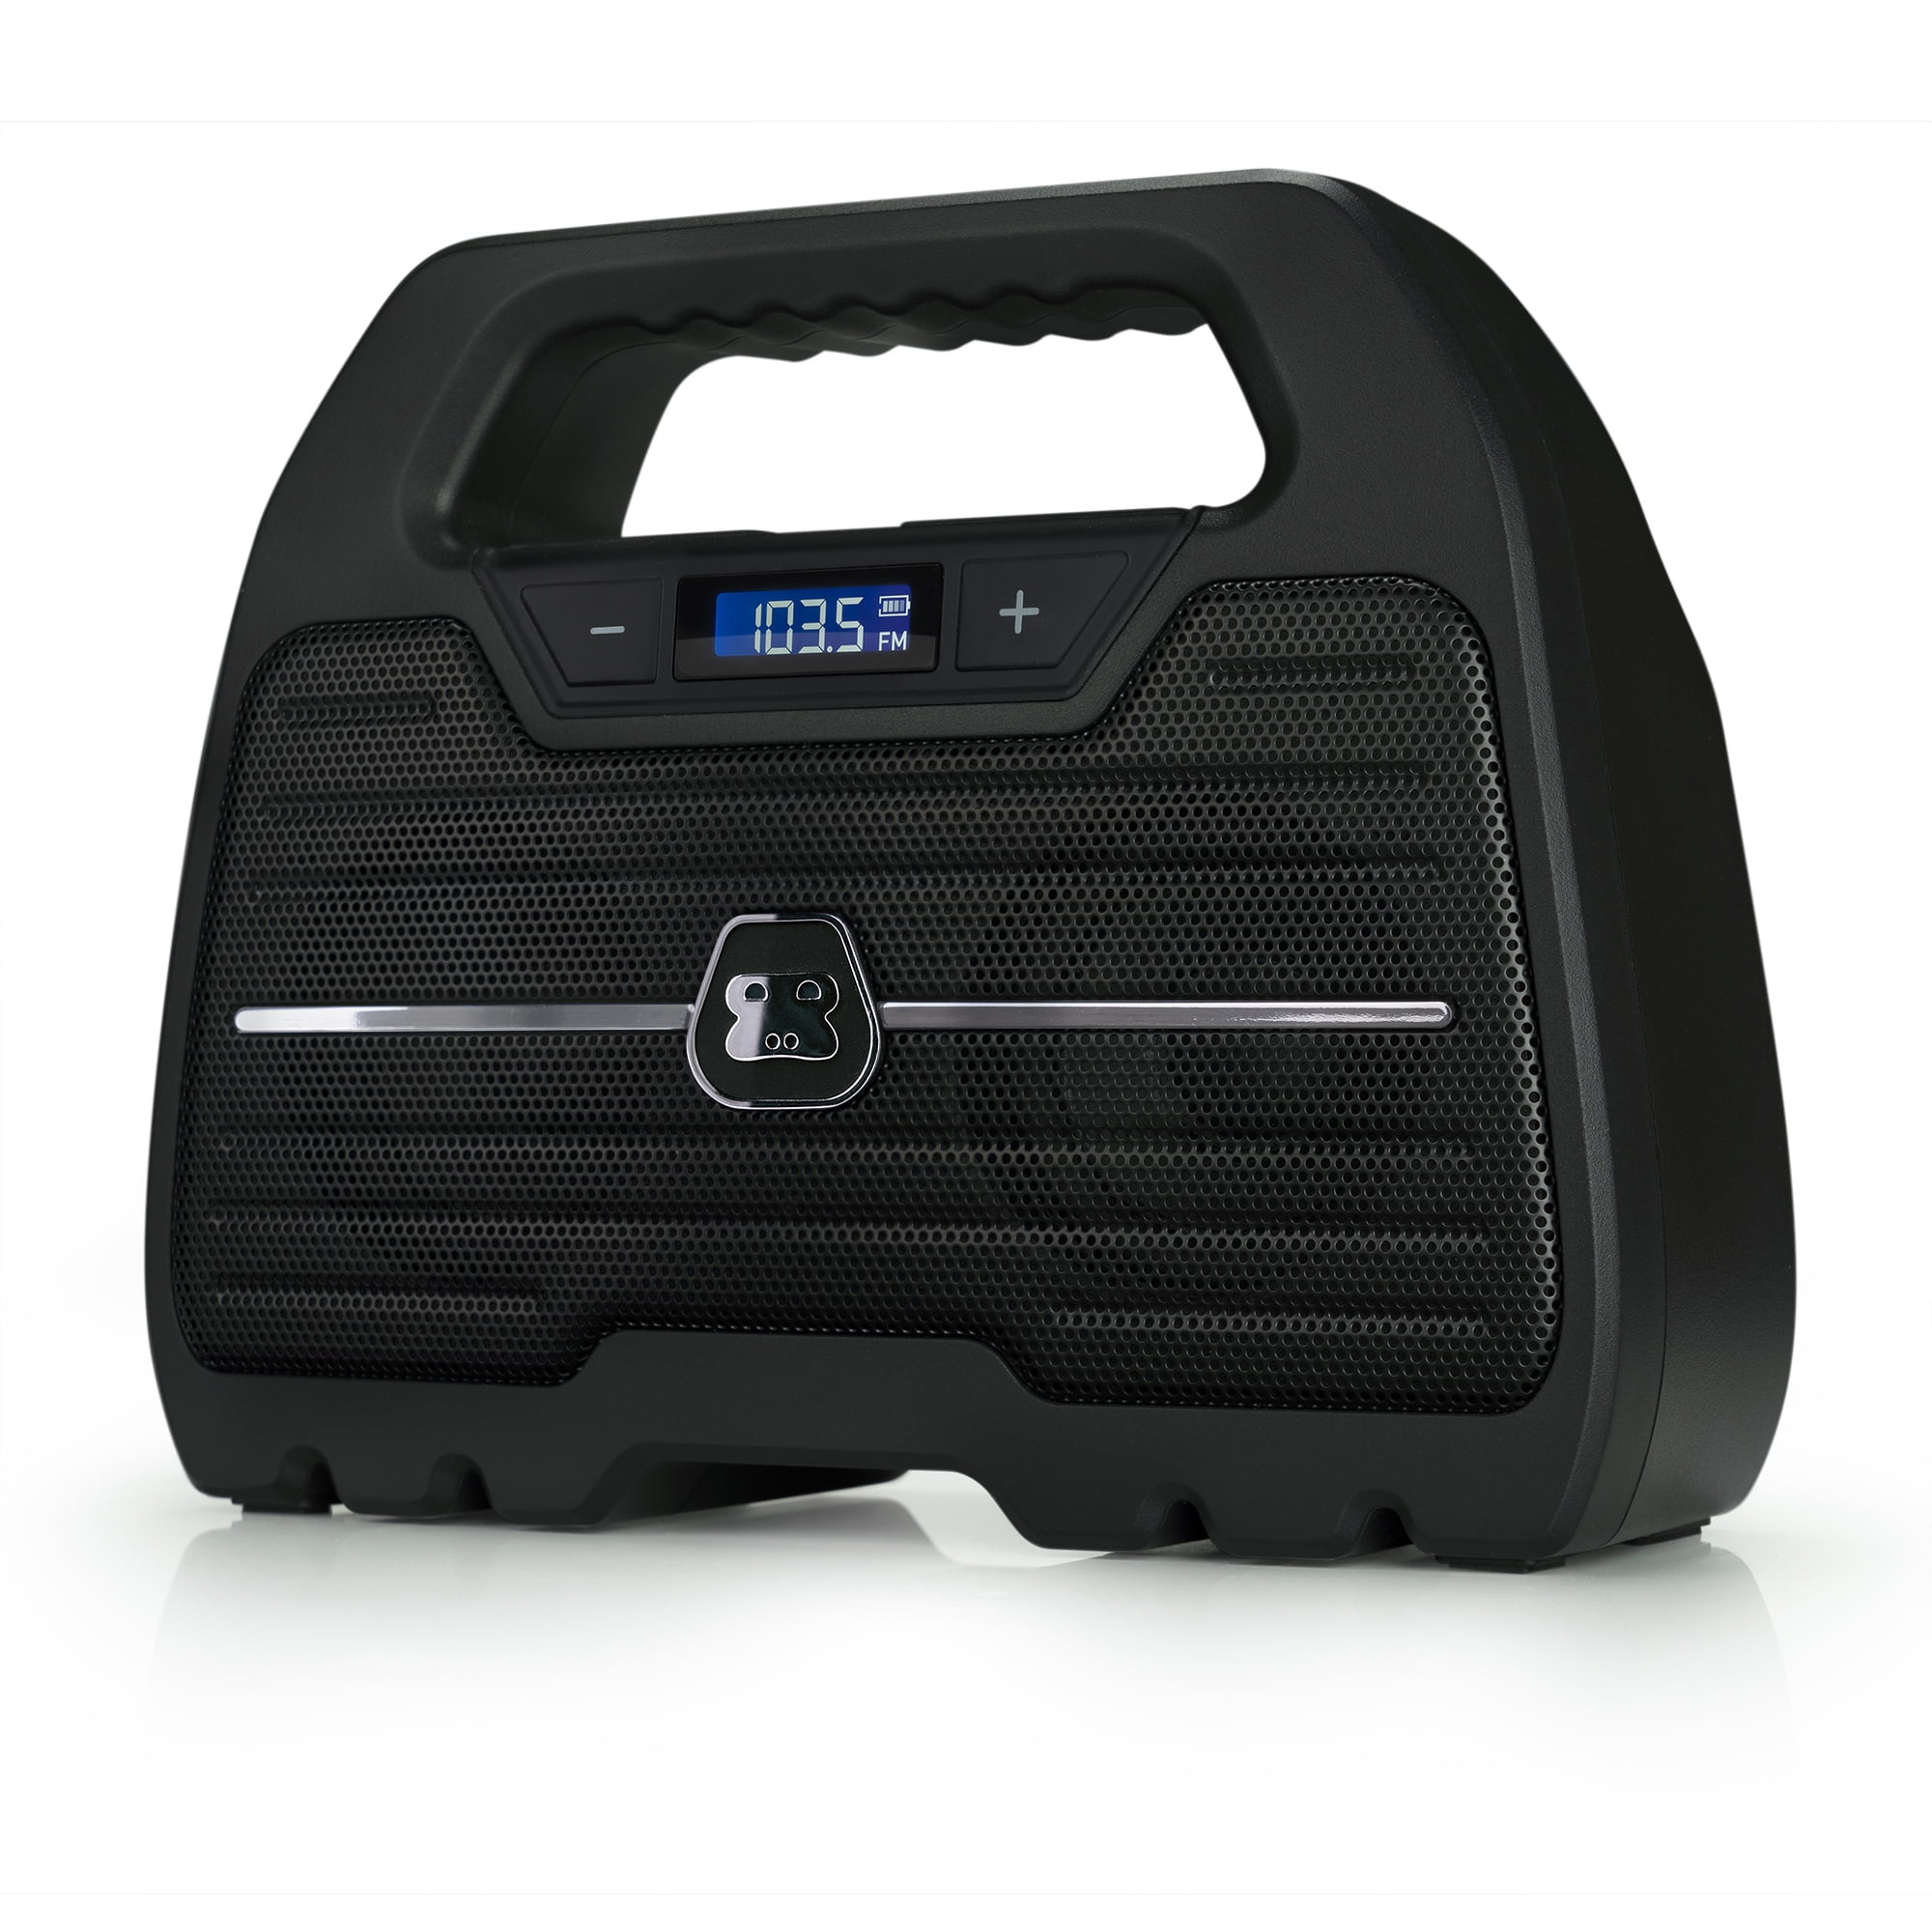 G-Project G-Storm Bluetooth Speaker, with AM FM Weather Radio and NOAA  Alerts